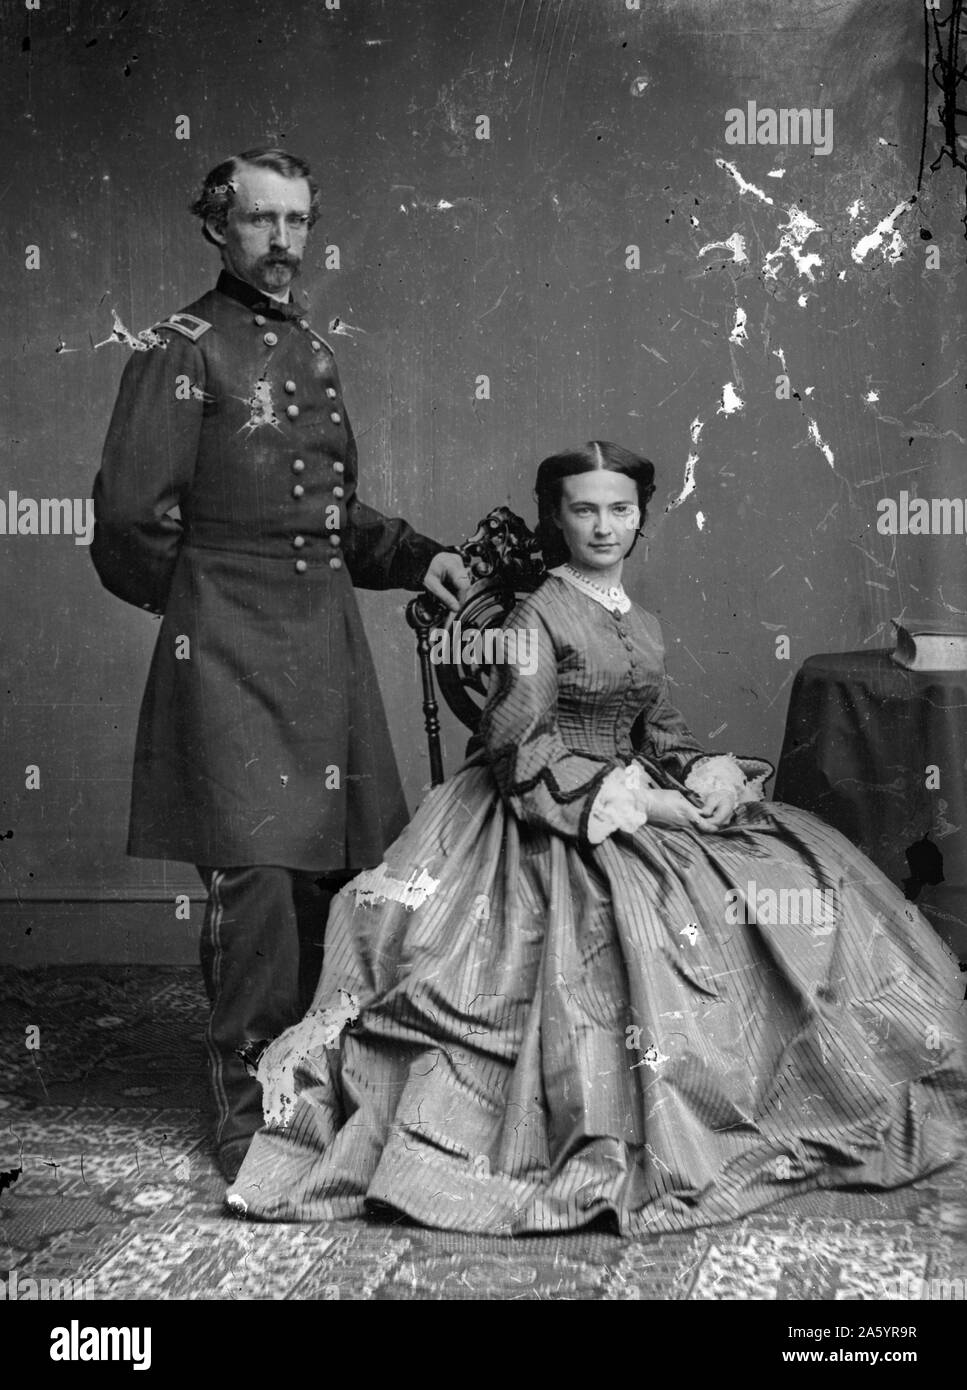 Photographic print of Elizabeth Custer (1842-1933) and husband George Armstrong Custer (1839-1876) United States Army officer and cavalry commander in the American Civil War and the American Indian Wars. Dated 1865 Stock Photo